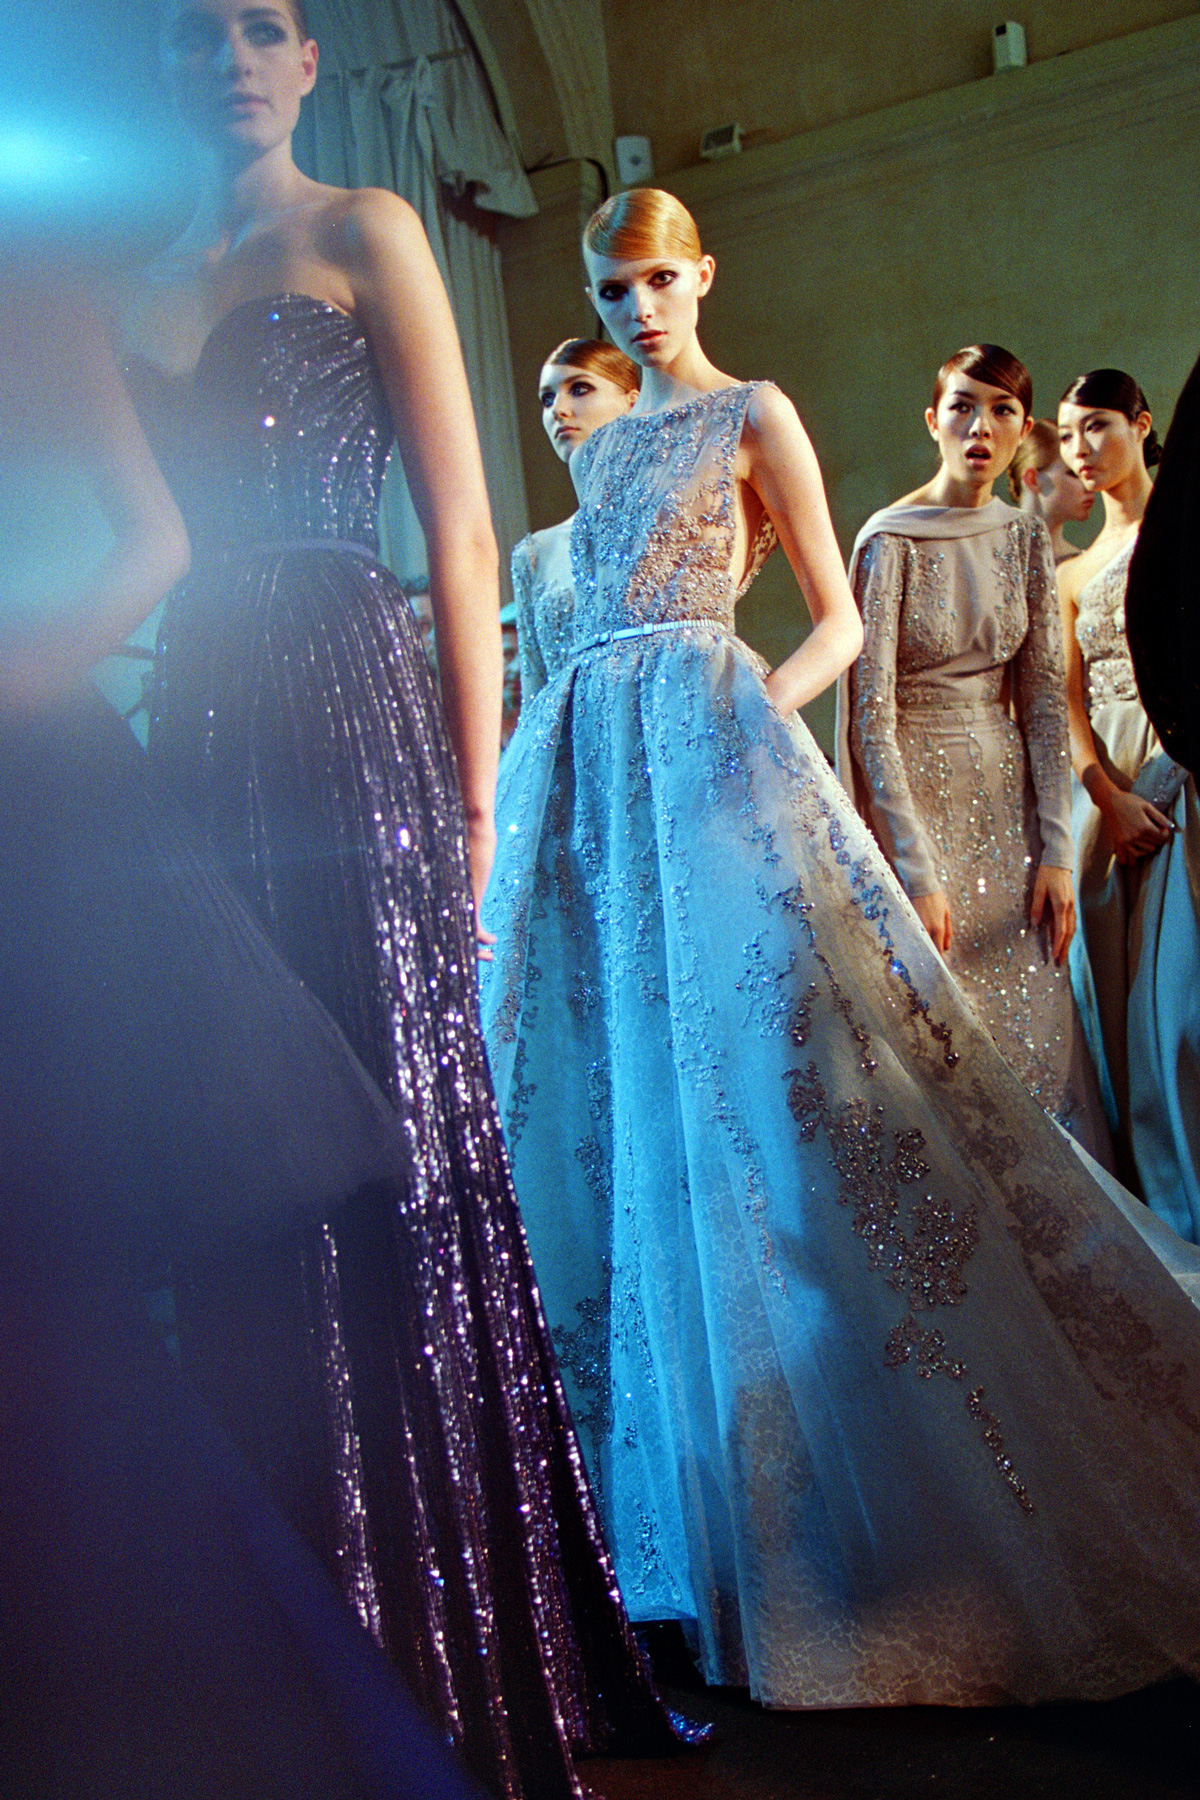 ELIE SAAB COUTURE BACKSTAGE FW 2013-14